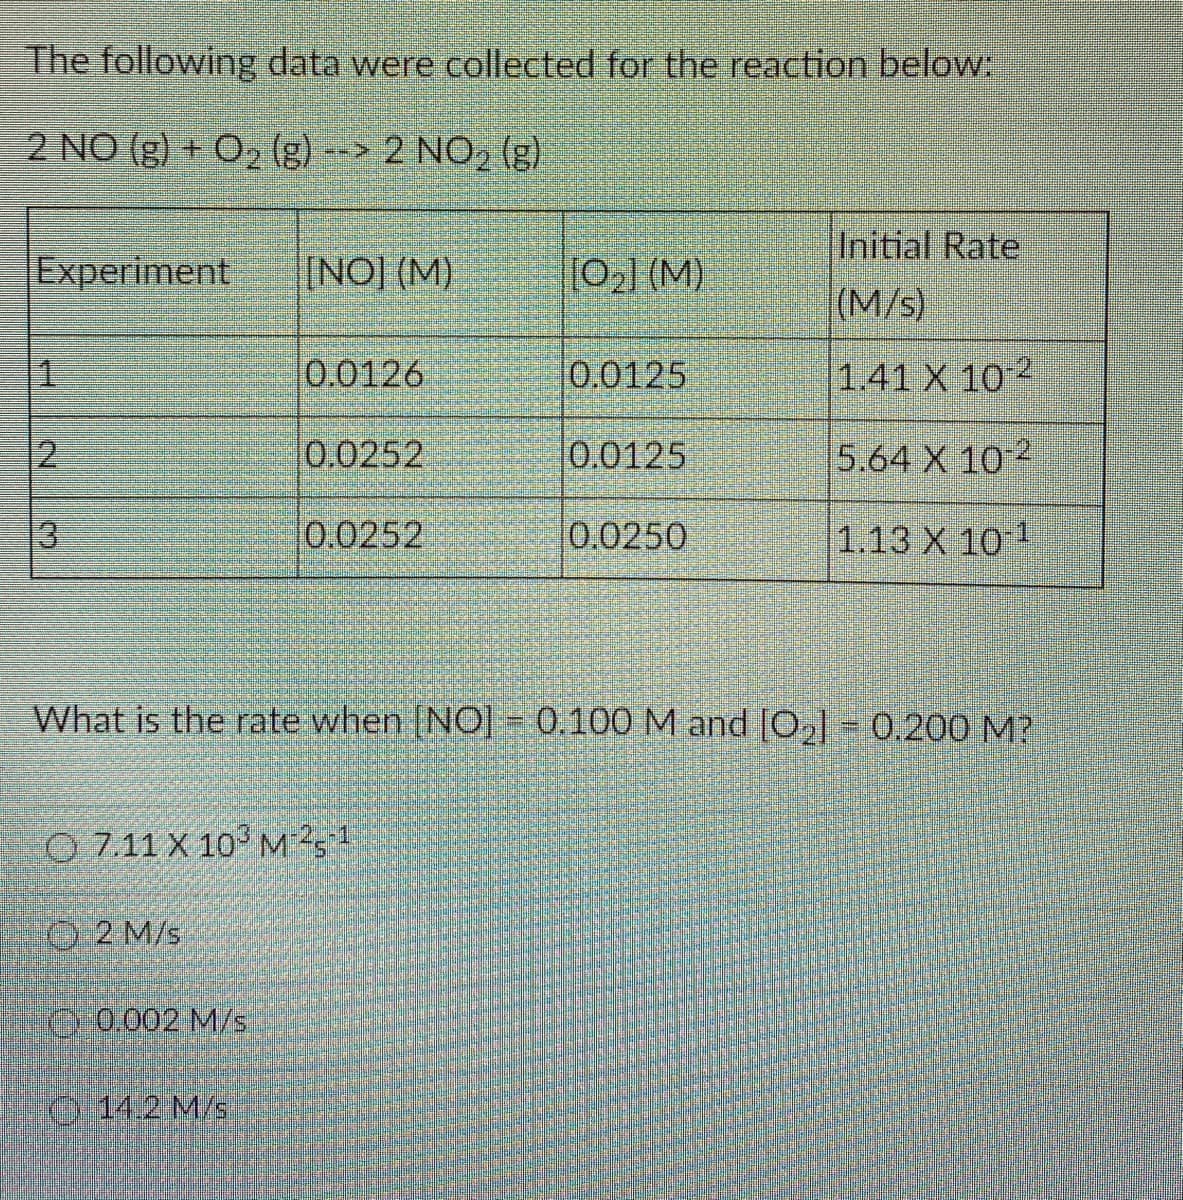 The following data were collected for the reaction below.
2 NO (g) + O2 (g) --> 2 NO, (g)
Initial Rate
Experiment
INO] (M)
HO:1 (M)
(M/s)
1.
0.0126
0.0125
1.41 X 10 2
2
0,0252
0.0125
5.64 X 102
13.
0.0252
0.0250
1.13 X 101
What is the rate when (NO] = 0.100 M and [0,] = 0.200 M?
O 7.11 X 10 M251
O 2 M/s
0:0.002 M/s
(0 14.2 M/s
